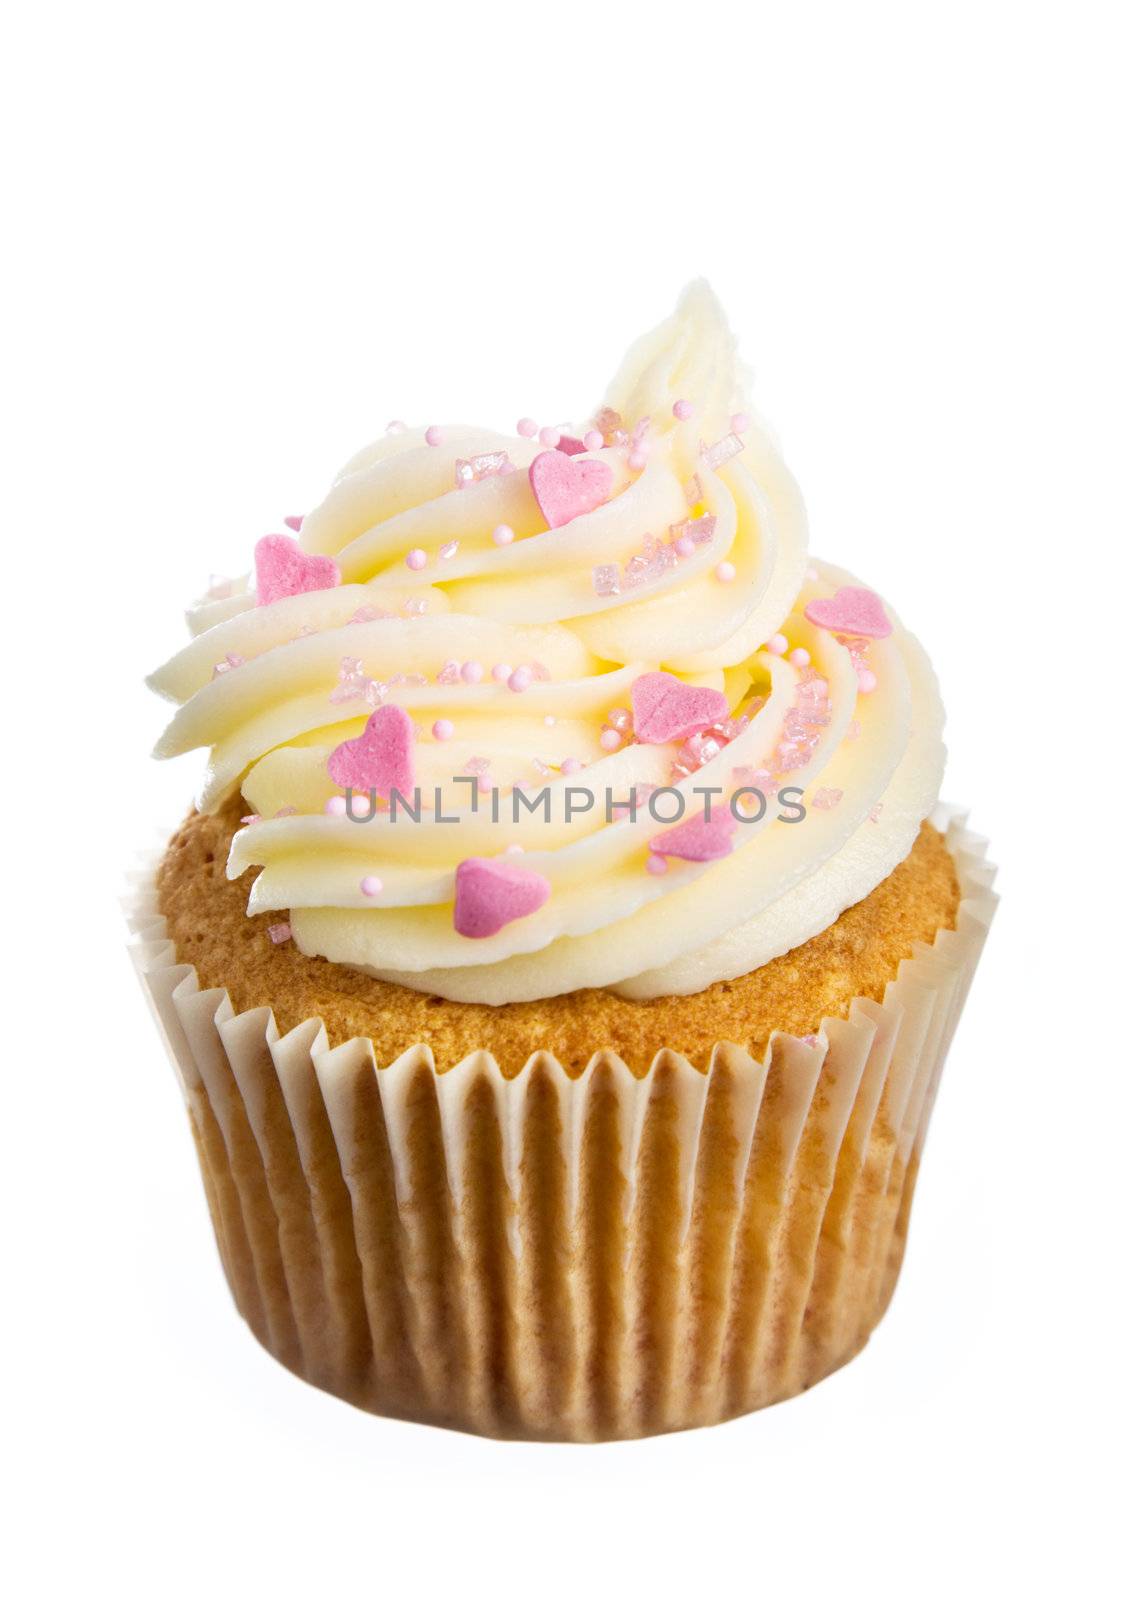 Cupcake decorated with frosting and pink sprinkles